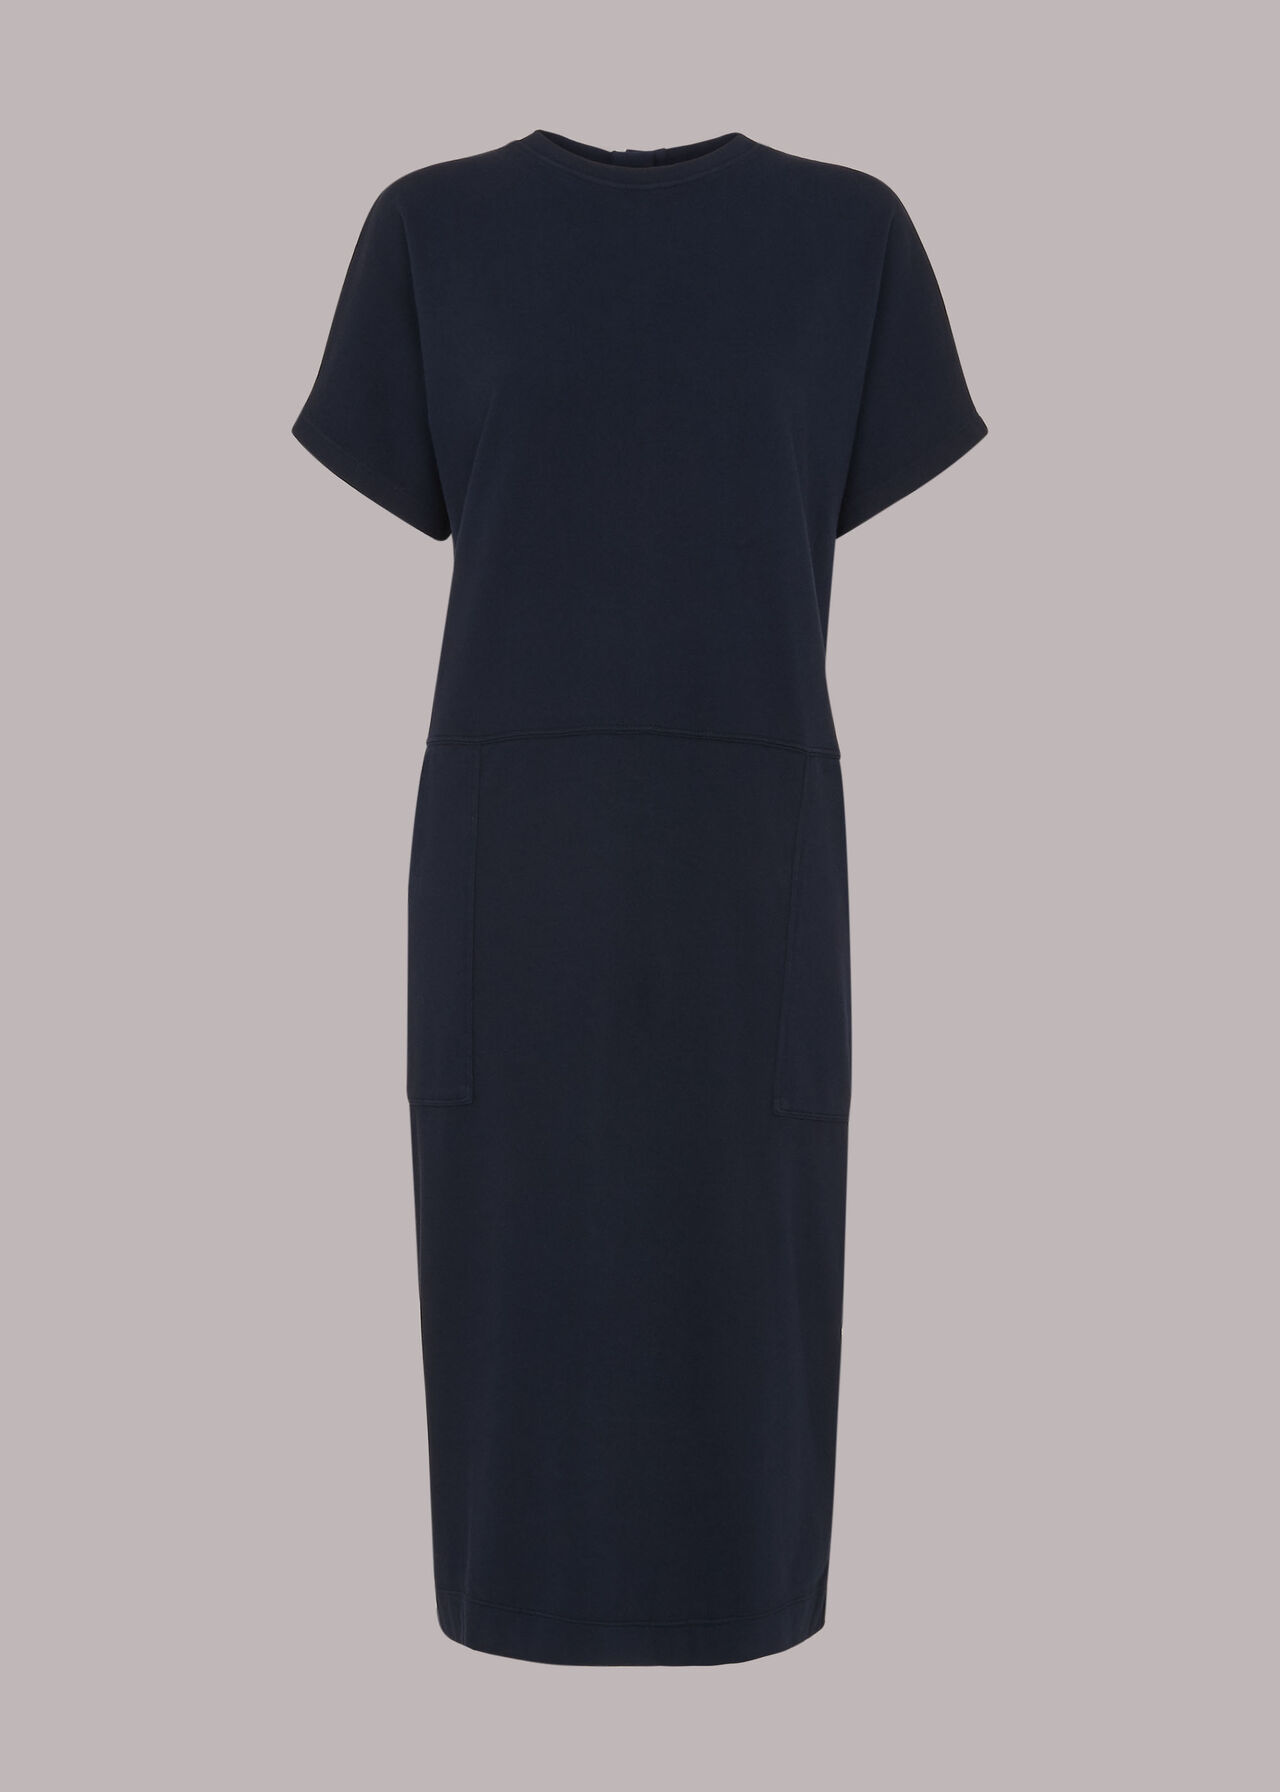 Navy Elsie Button Back Jersey Dress | WHISTLES